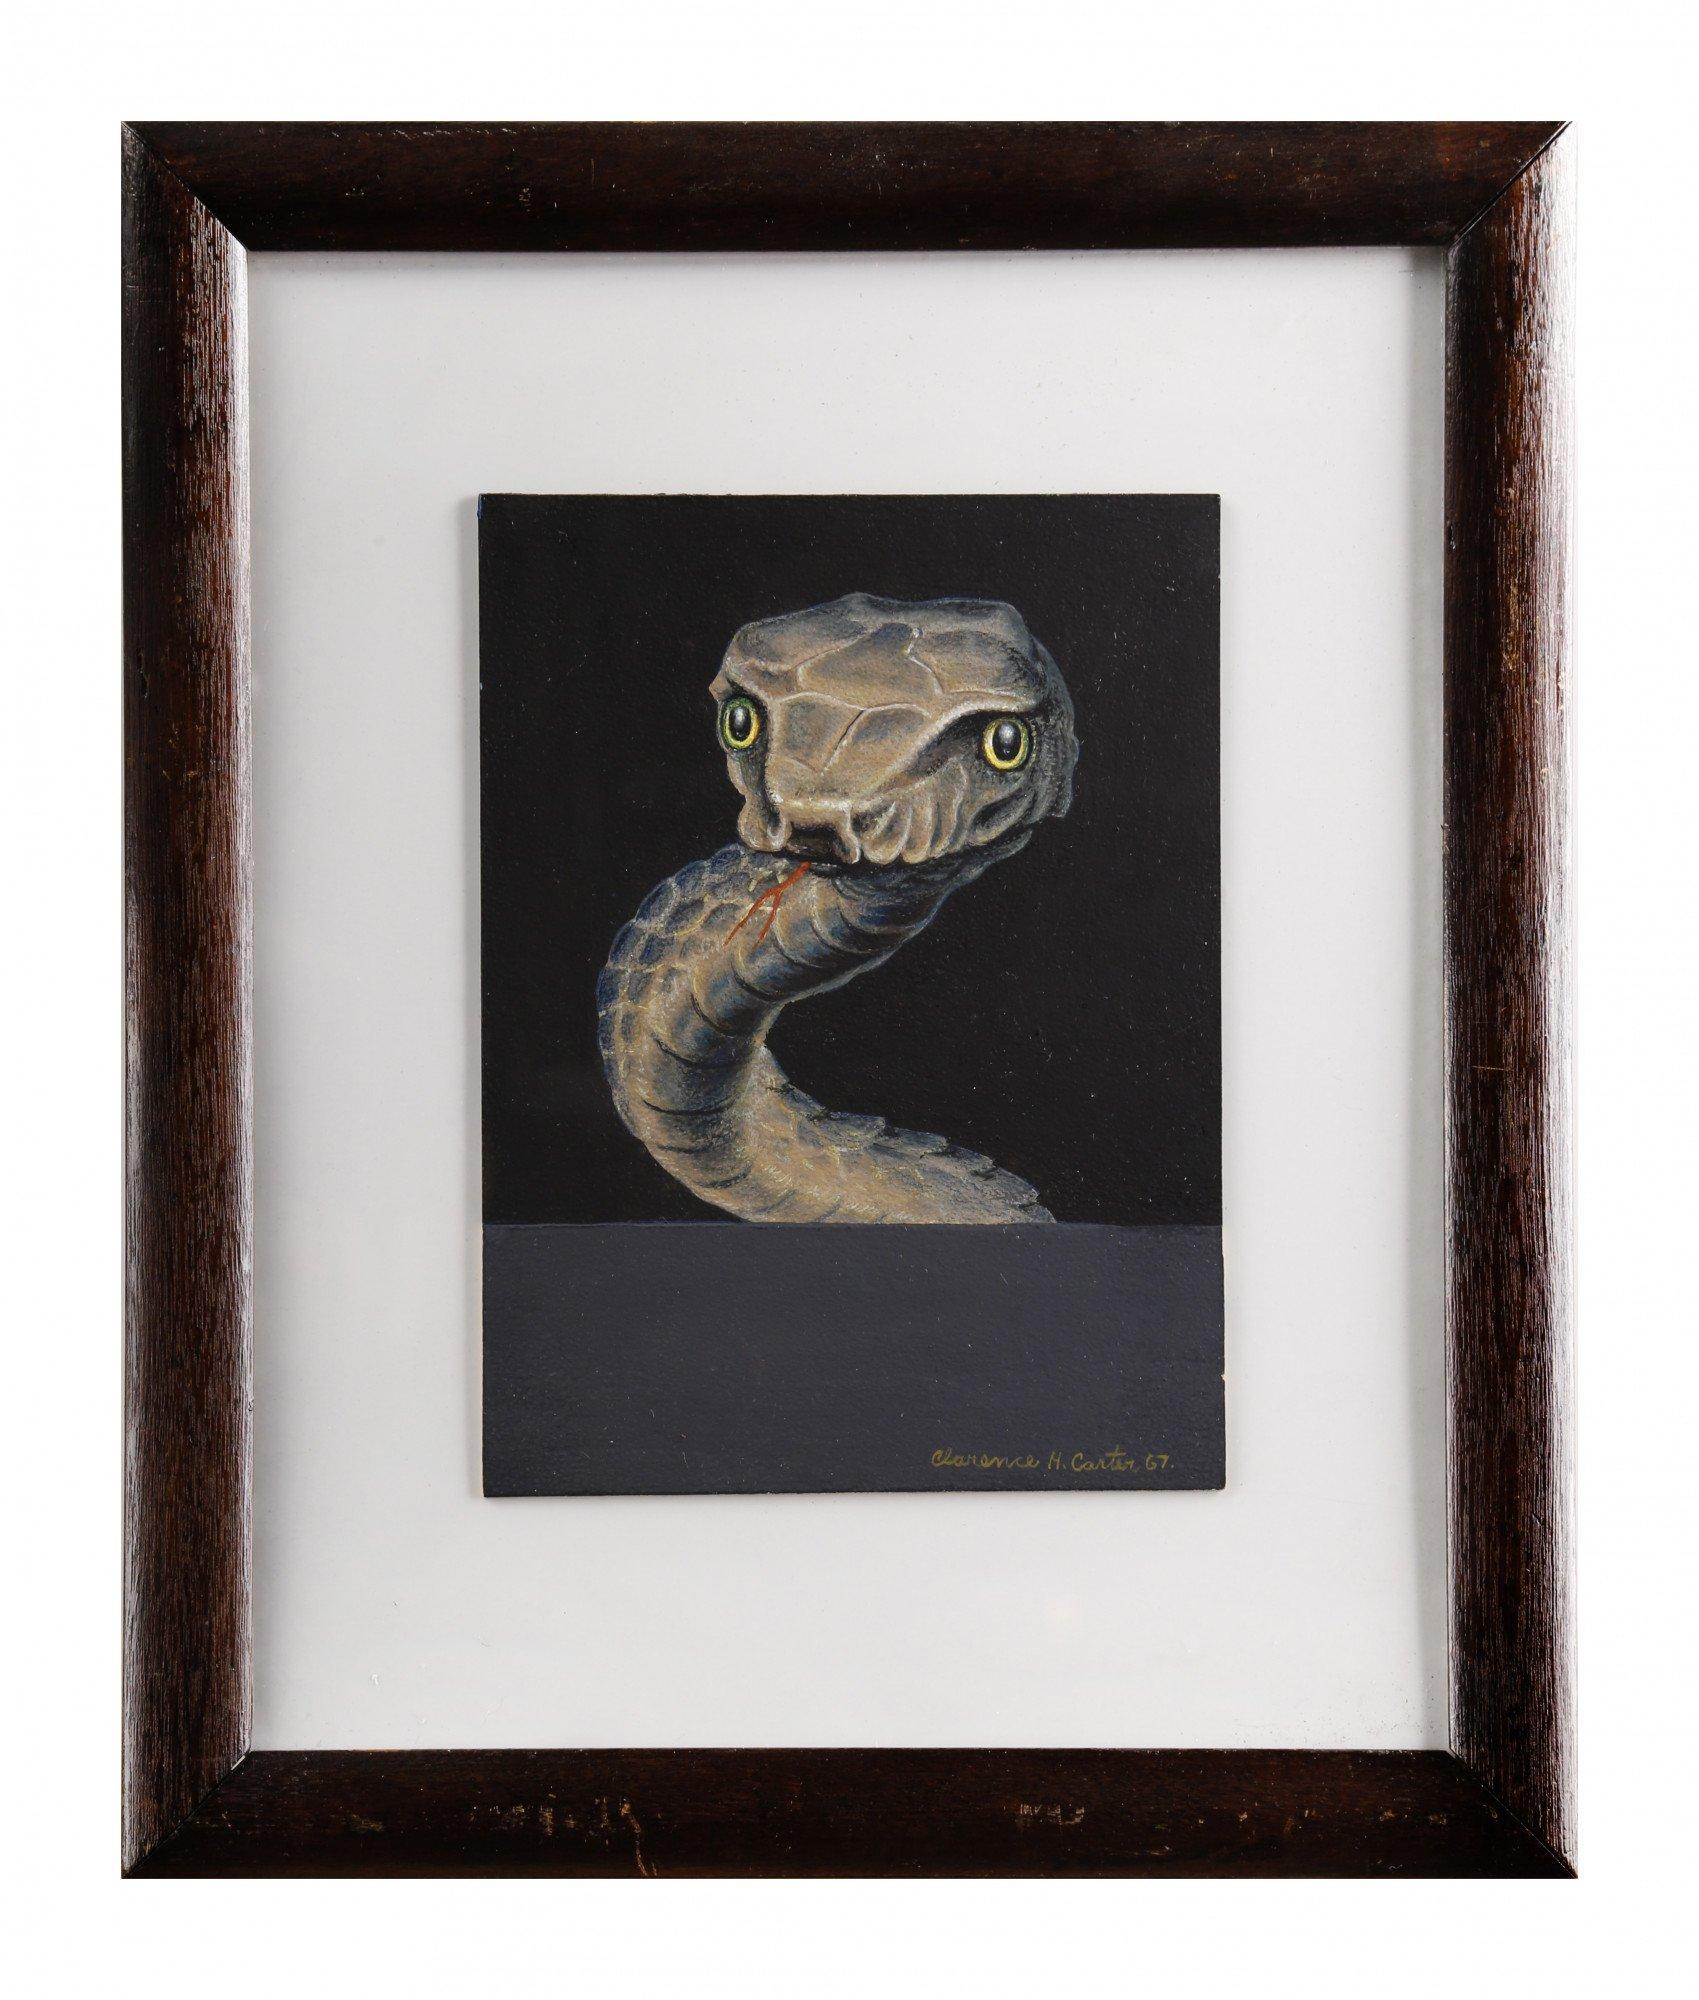 Over and Above Surprise (Serpent), 1960s snake painting, Cleveland School  - Painting by Clarence Holbrook Carter